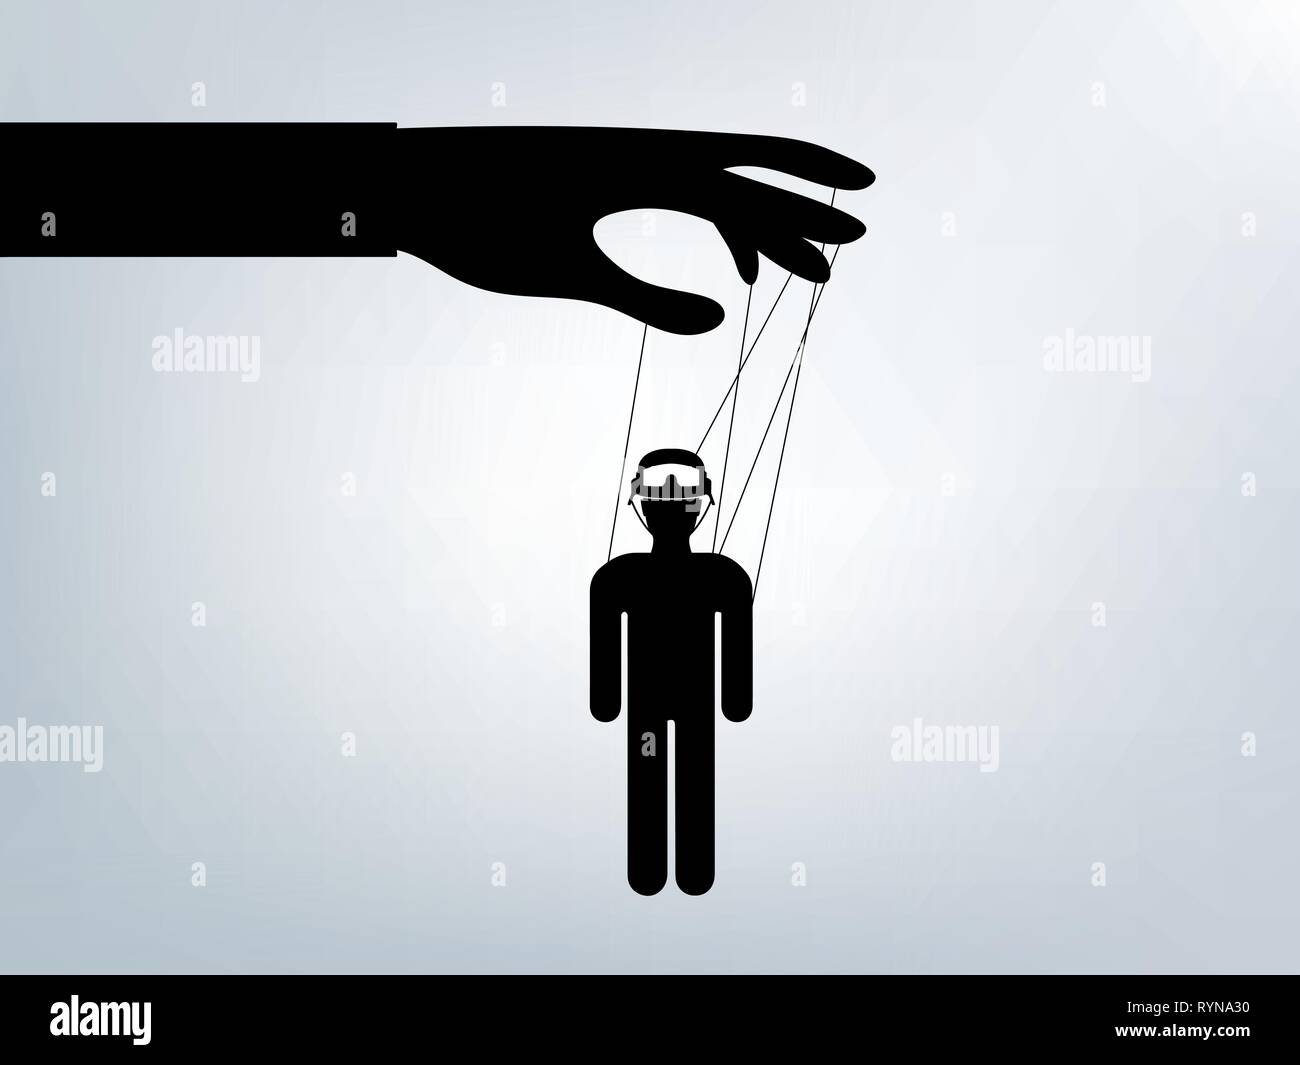 Conceptual stick figure vector with manipulated military Stock Vector